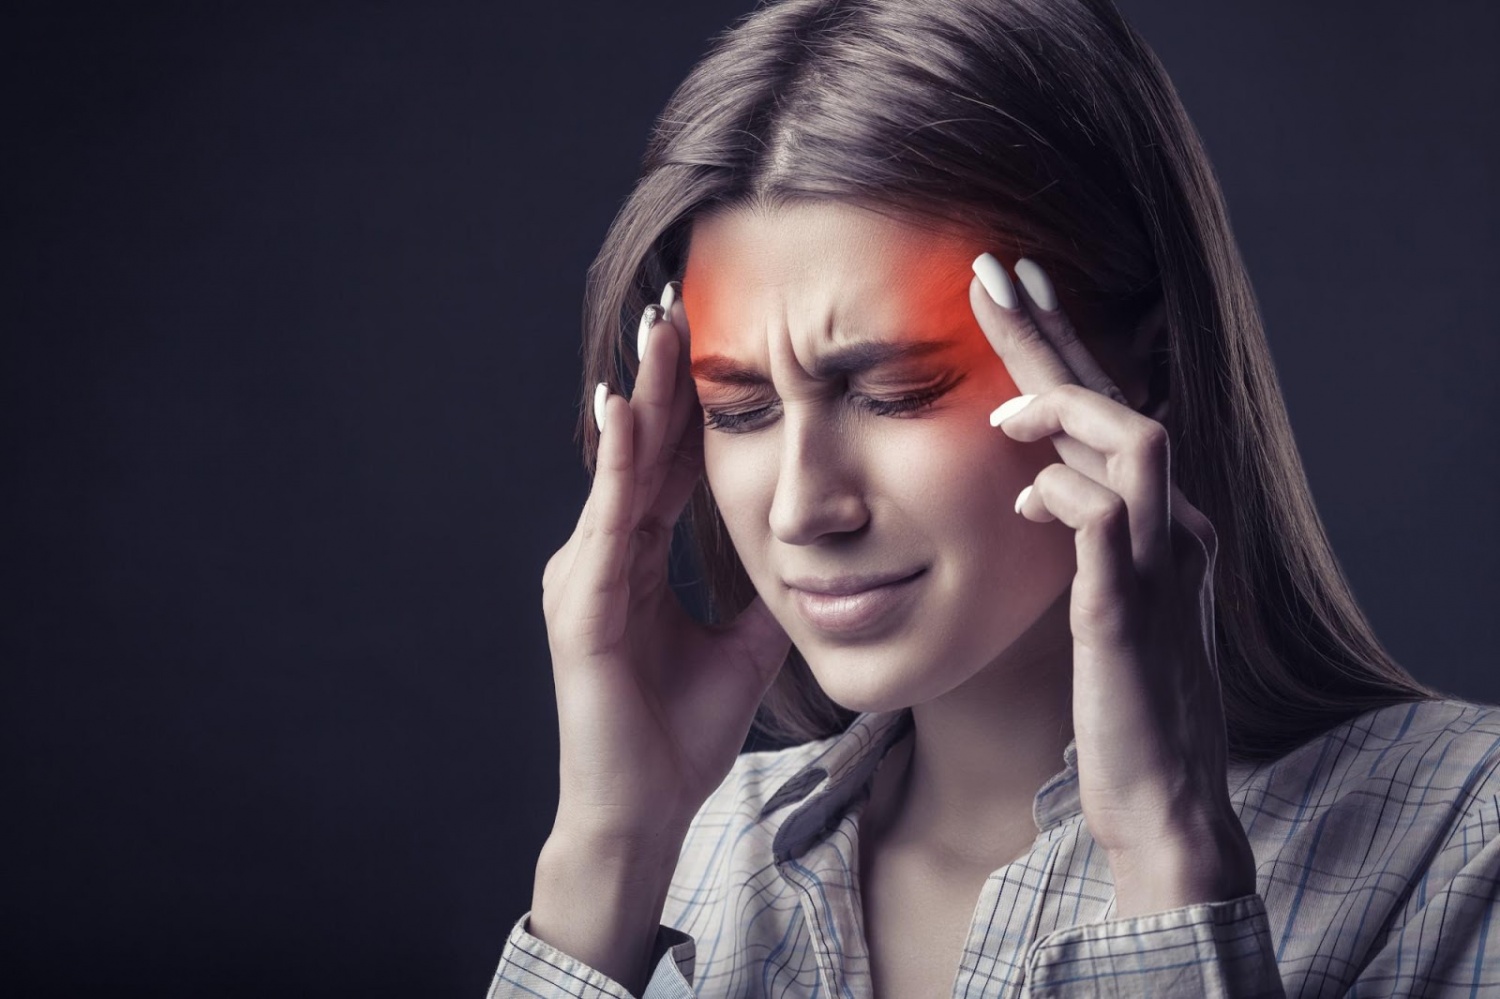 Why Do I Have Daily Headaches? 5 Potential Causes